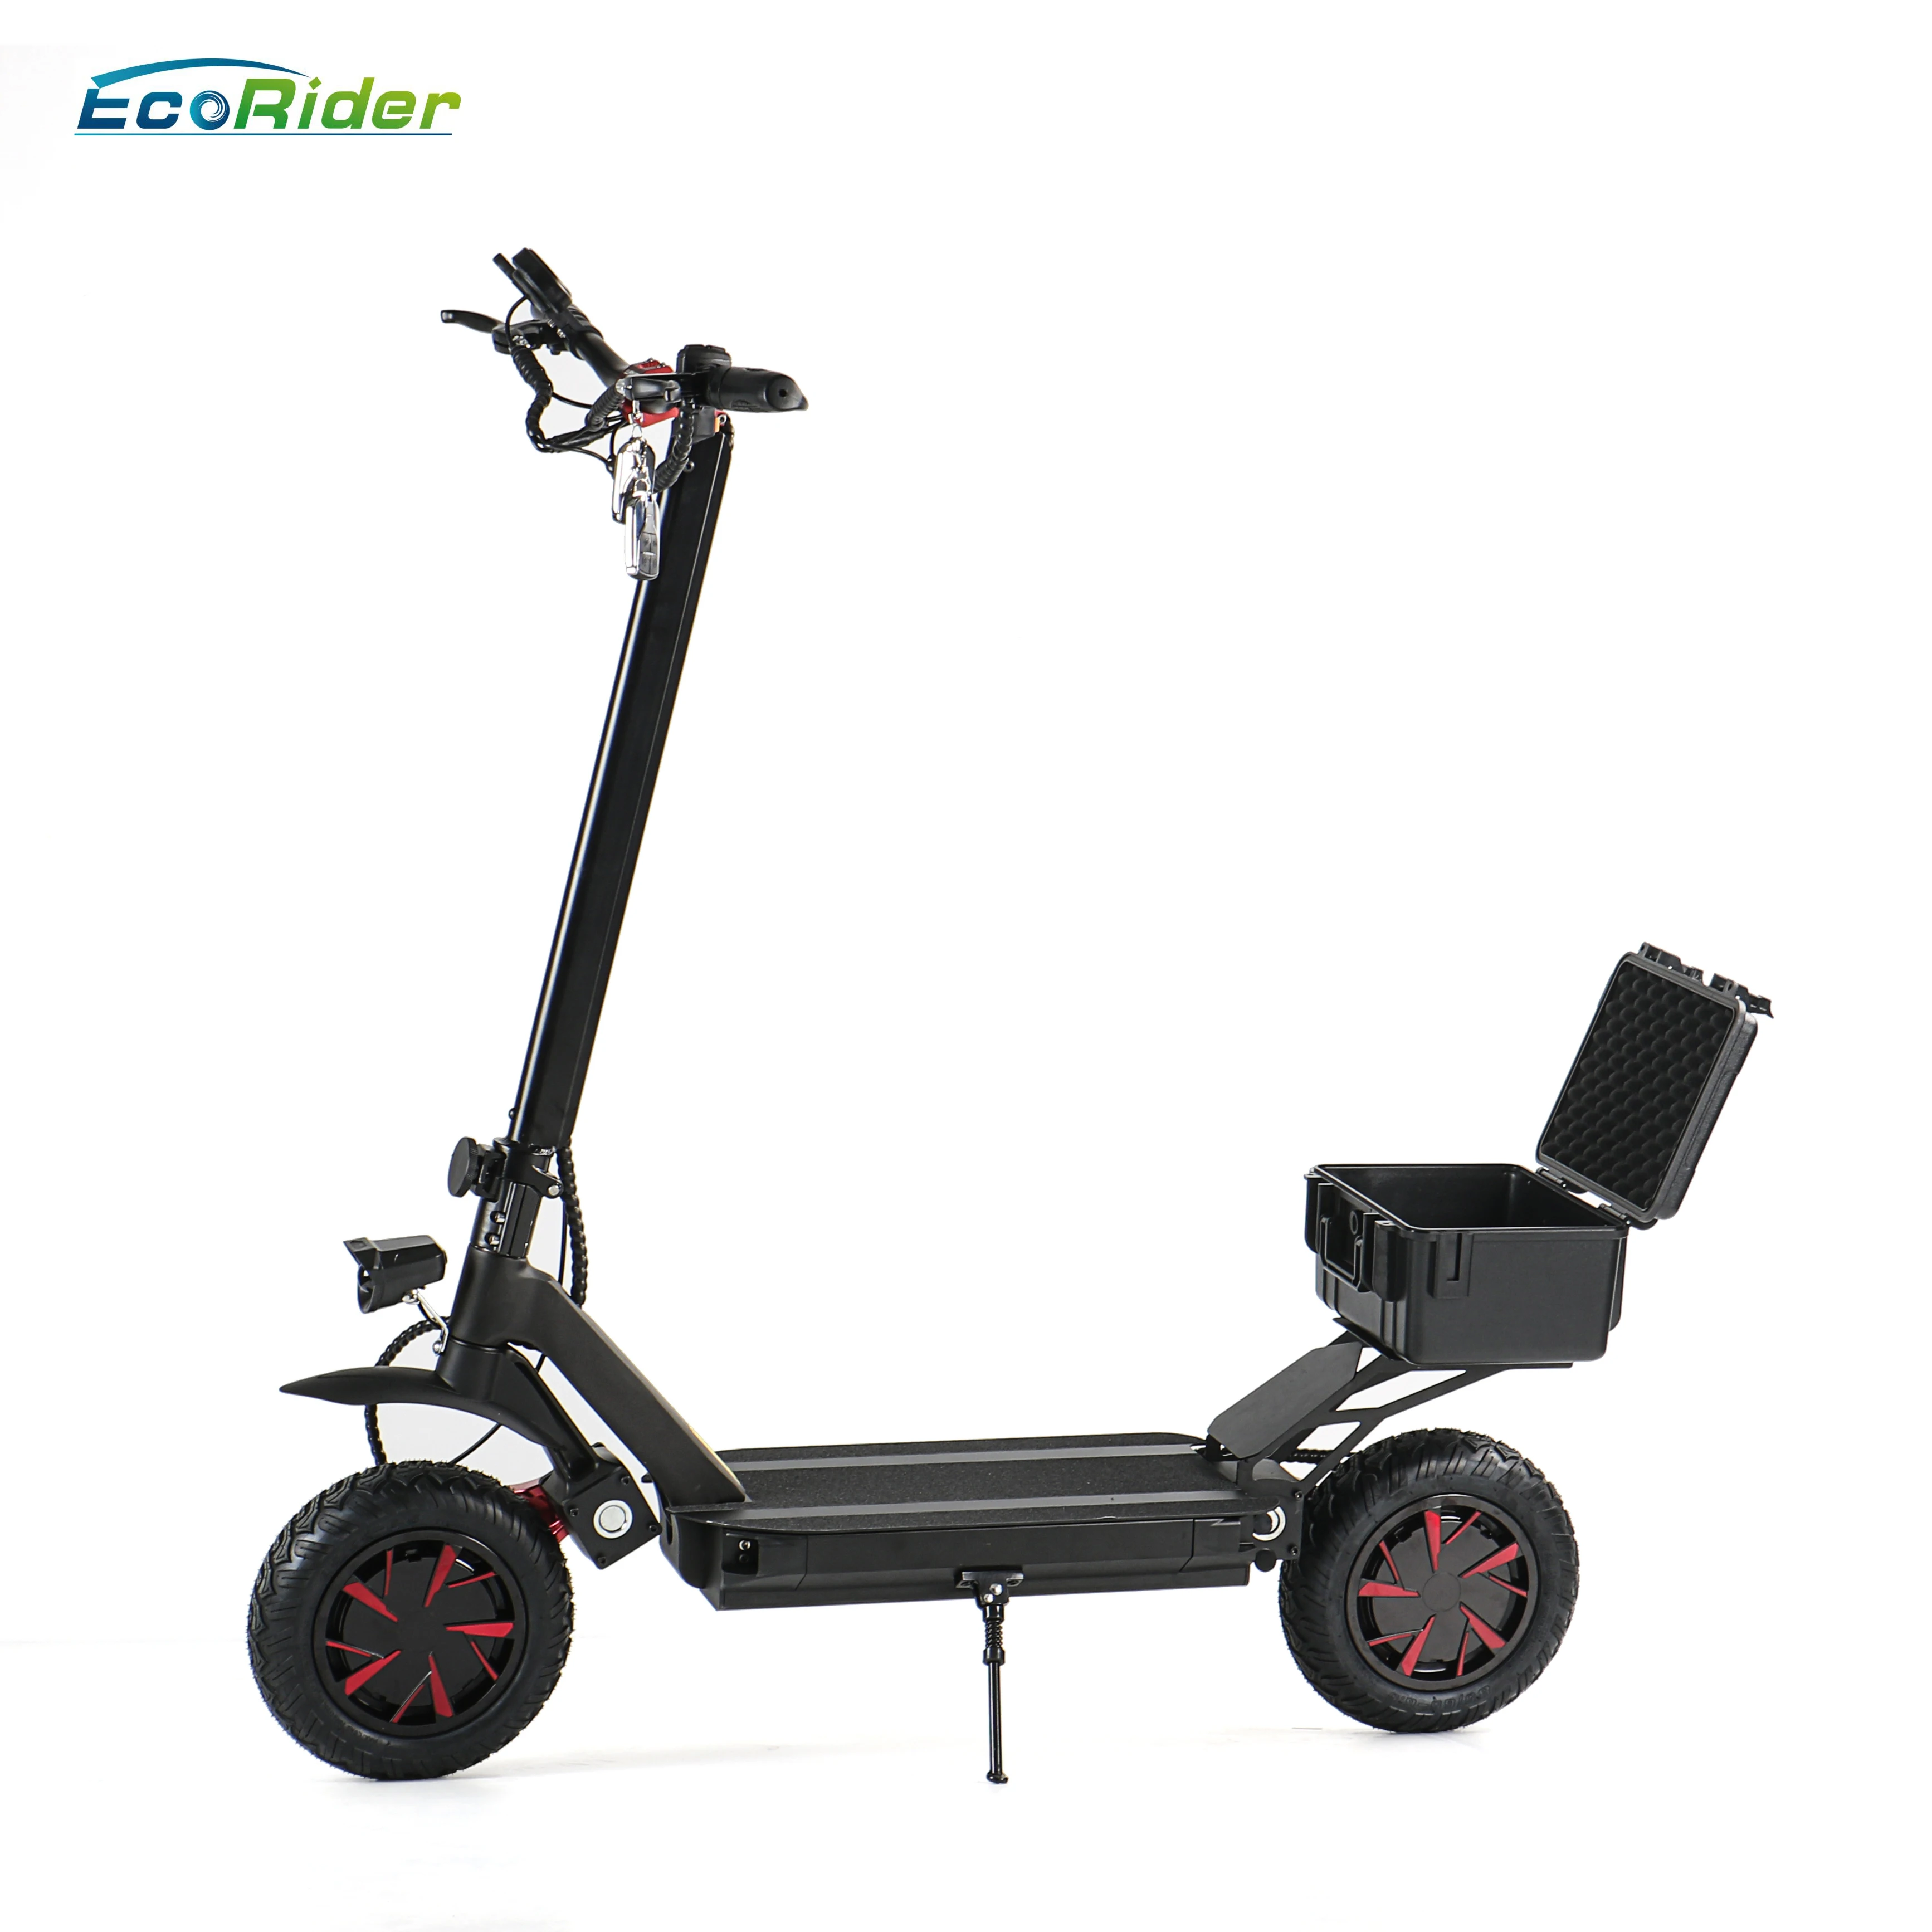 

EcoRider E4-9 E Scooter Manufacturer 3600W 60V 20.8AH Lithium Battery Scooters Adult Electric Kick Scooter